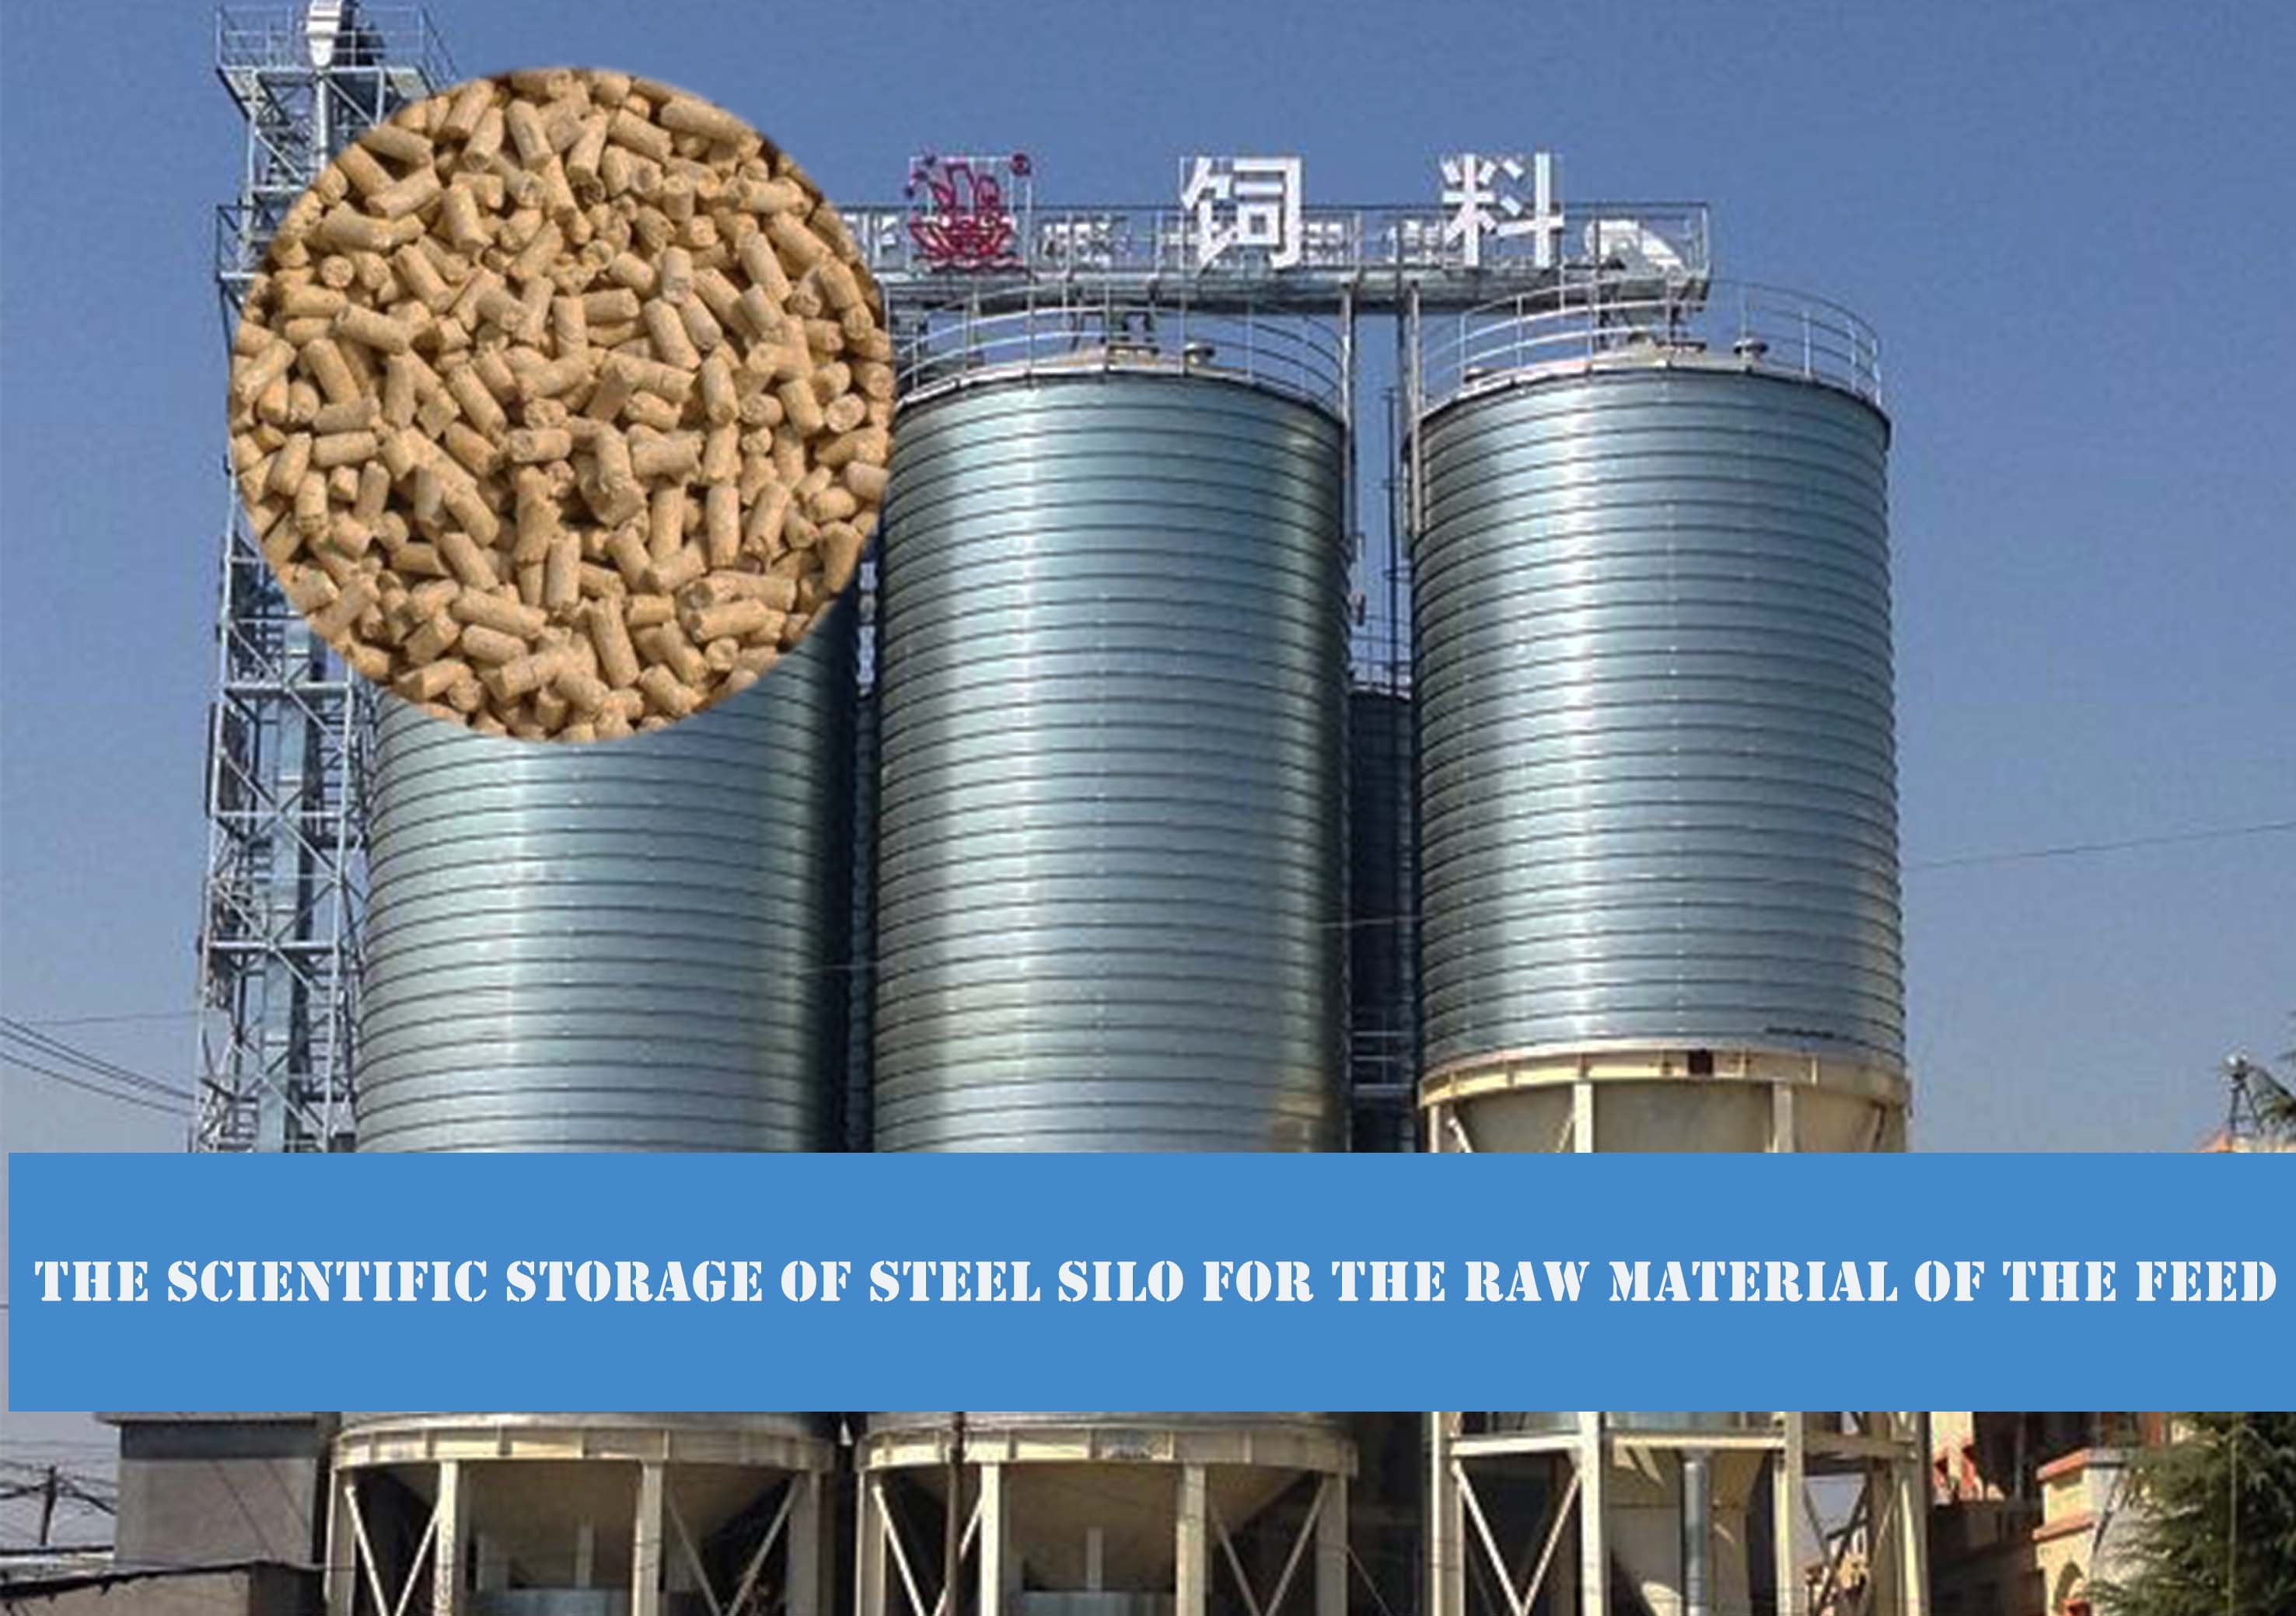 The Scientific Storage of Steel Silo for the Raw Material of the Feed